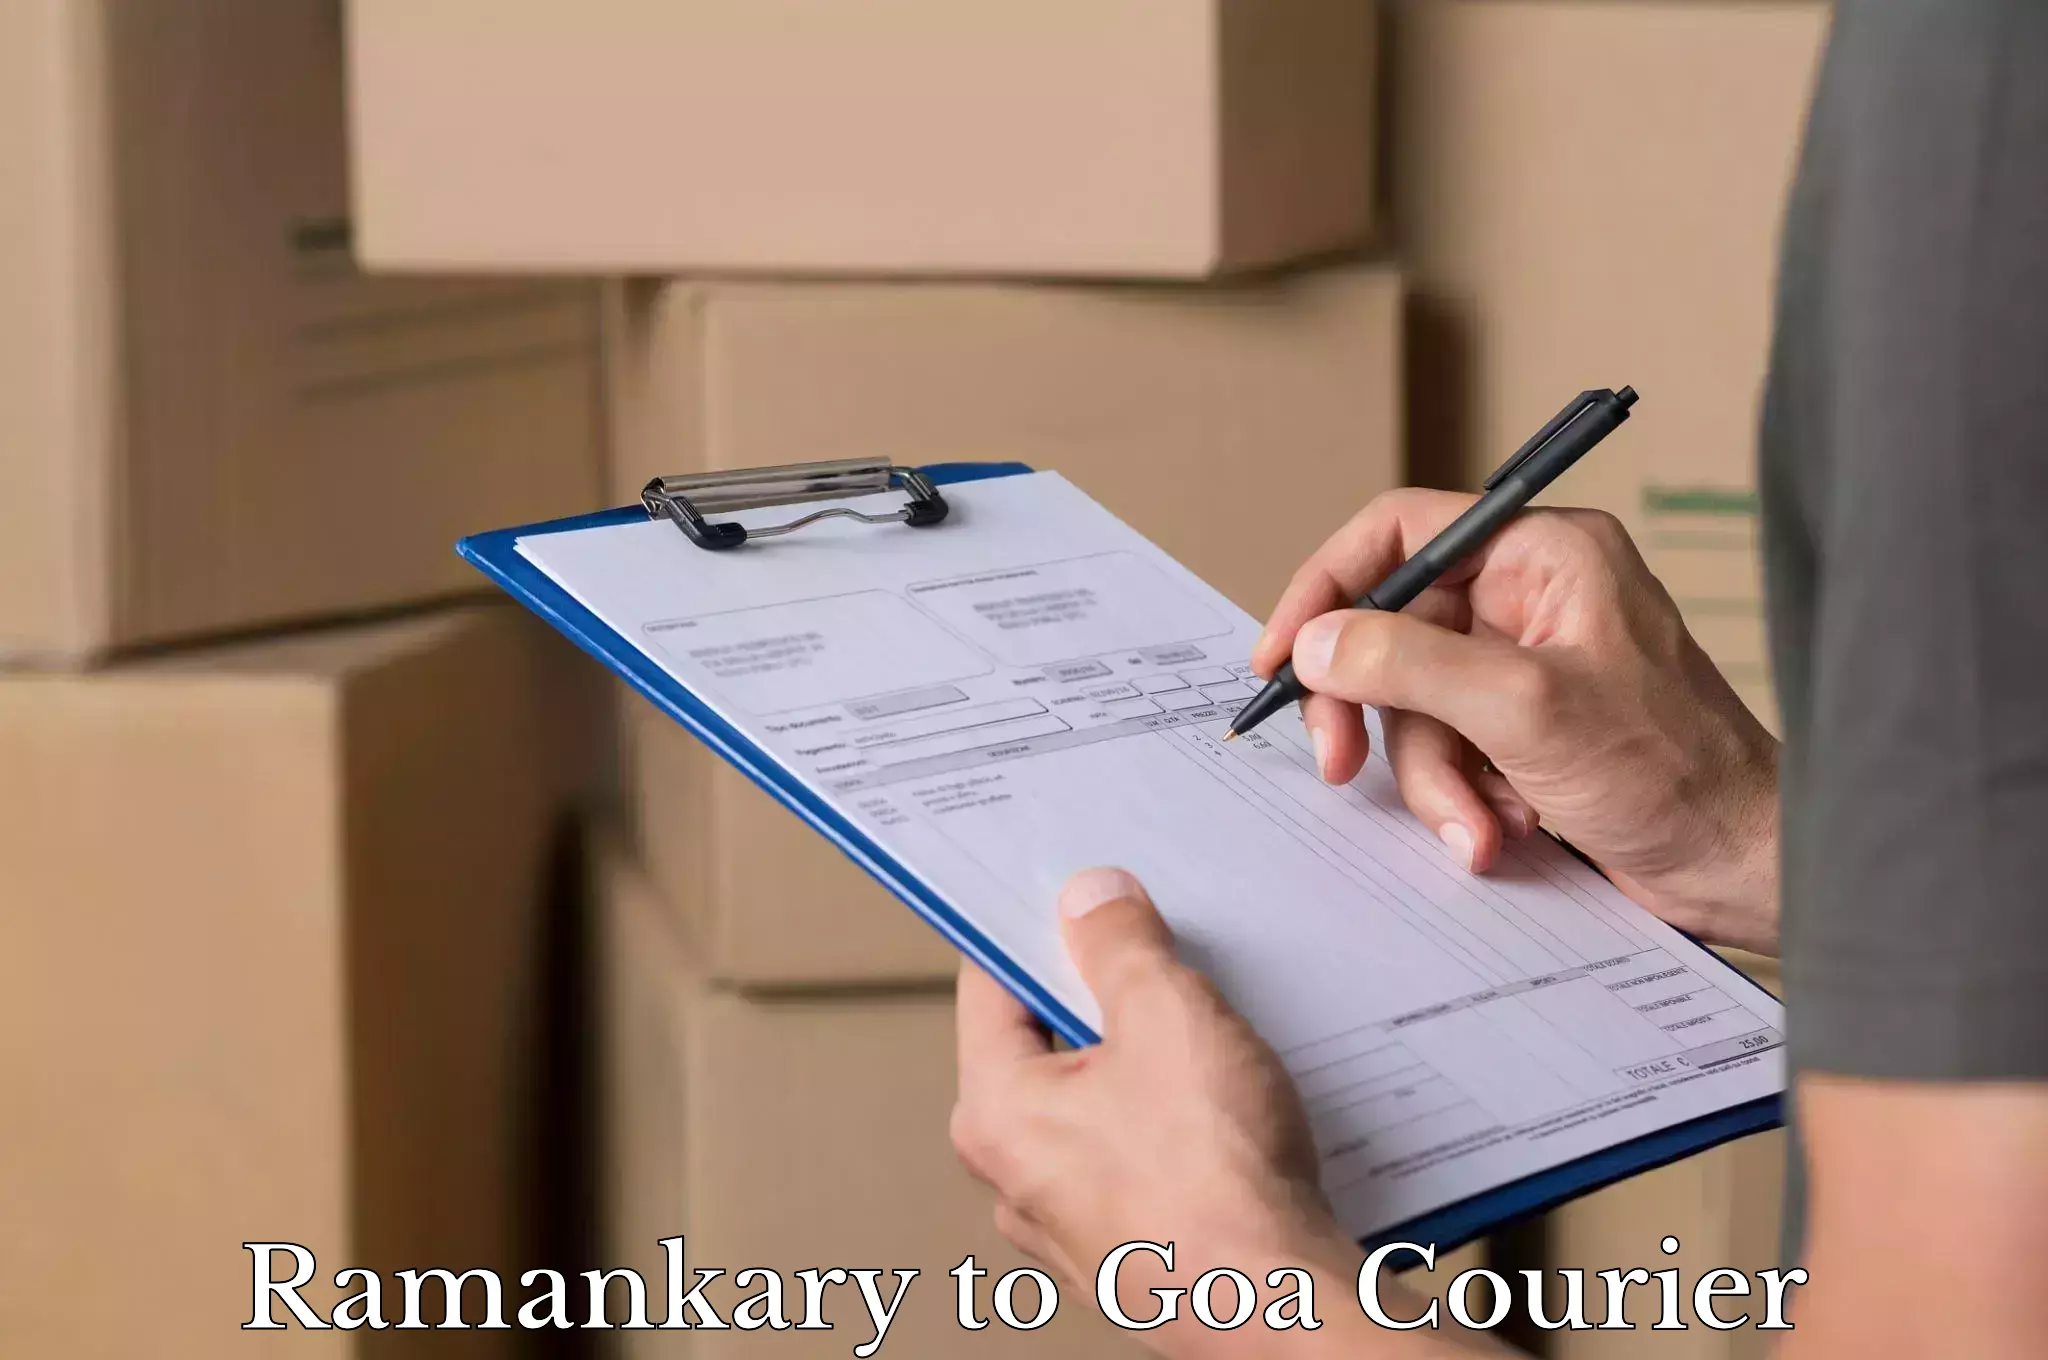 Instant baggage transport quote Ramankary to Goa University